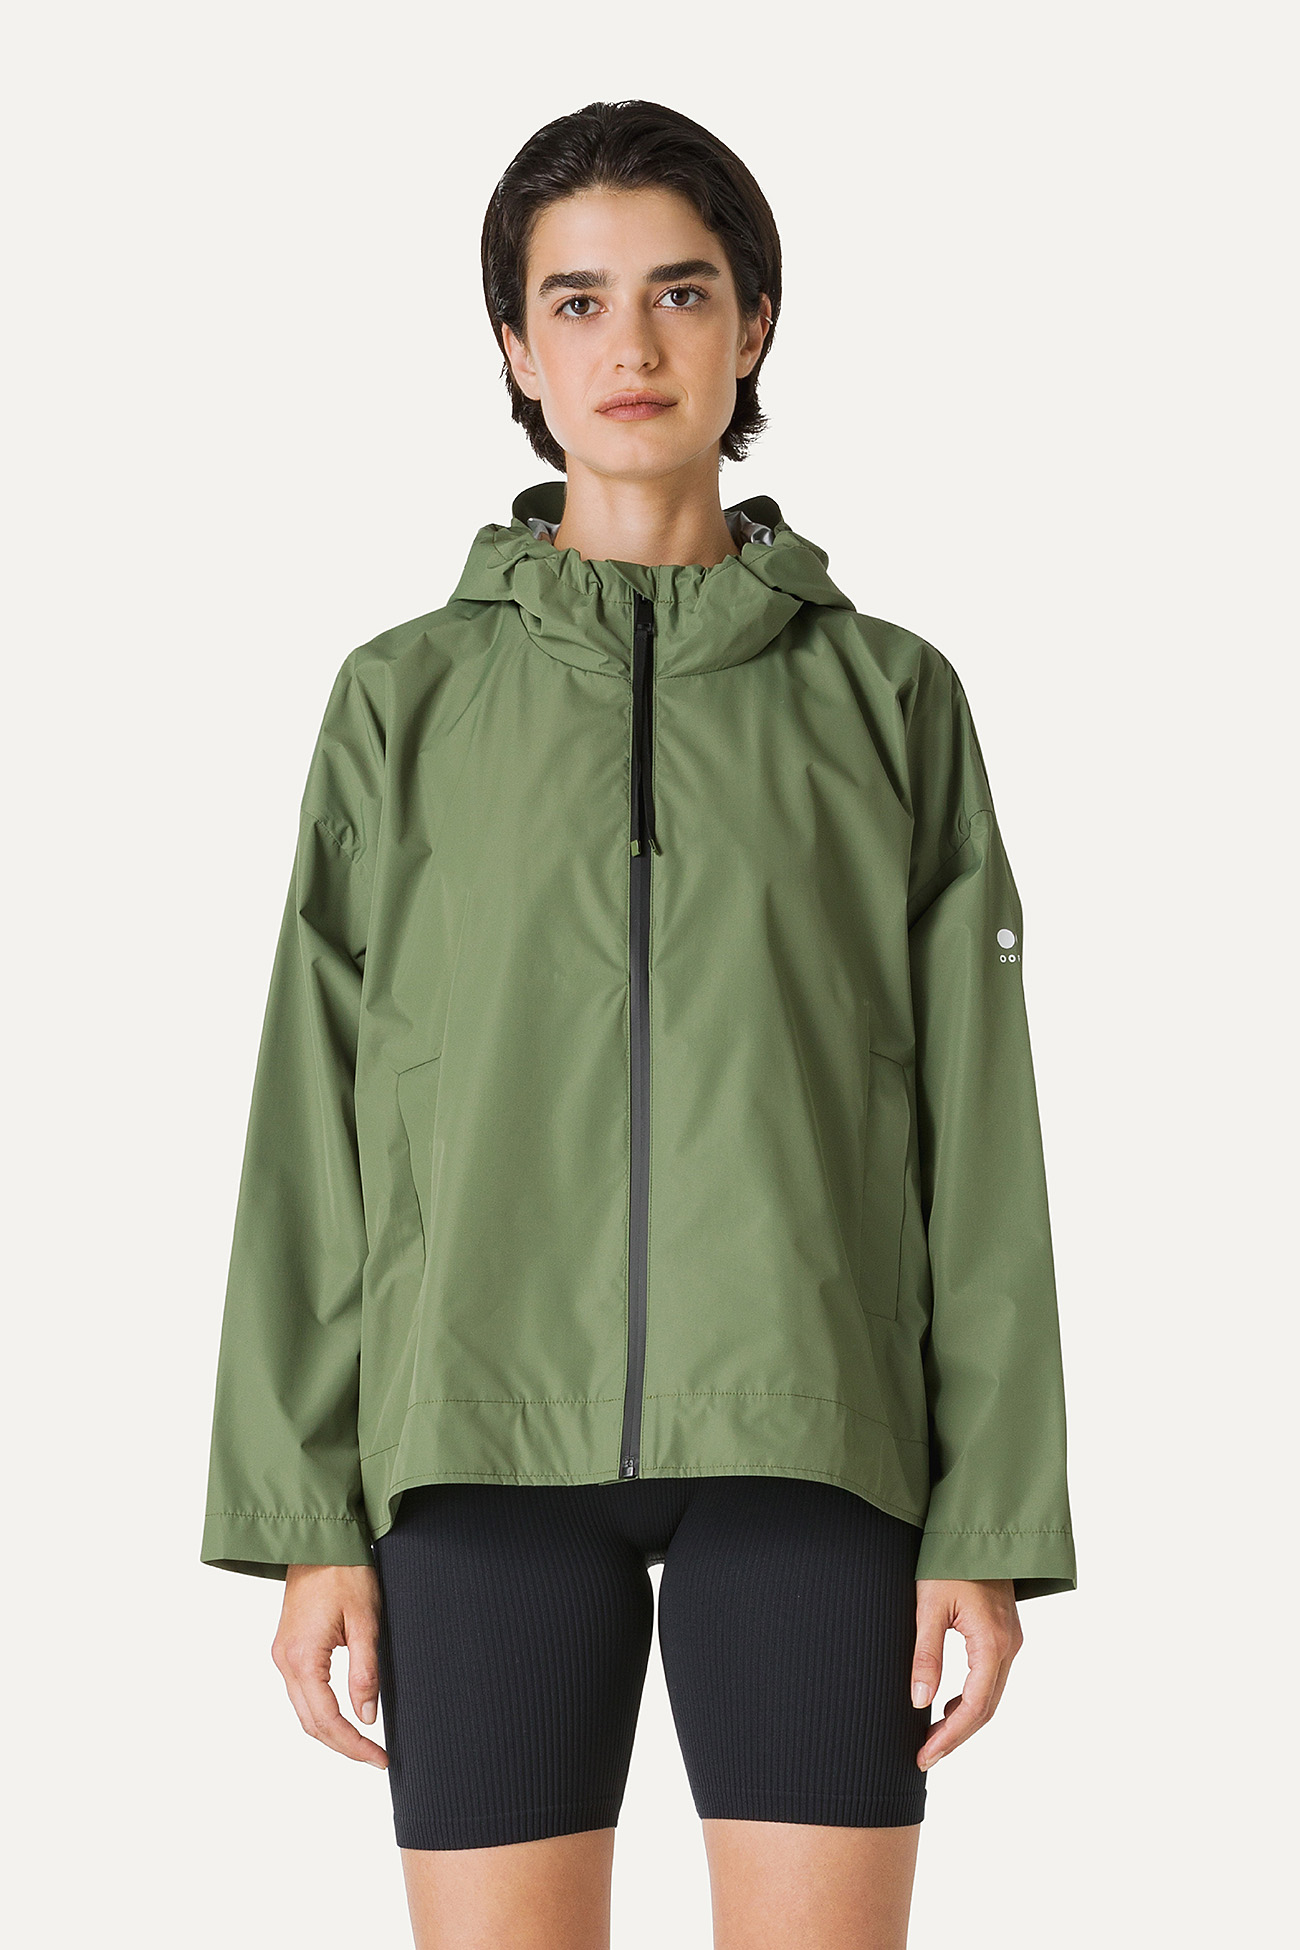 SHORT NYLON JACKET WITH SILVER LINING 9214 - OLIVE GREEN - OOF WEAR